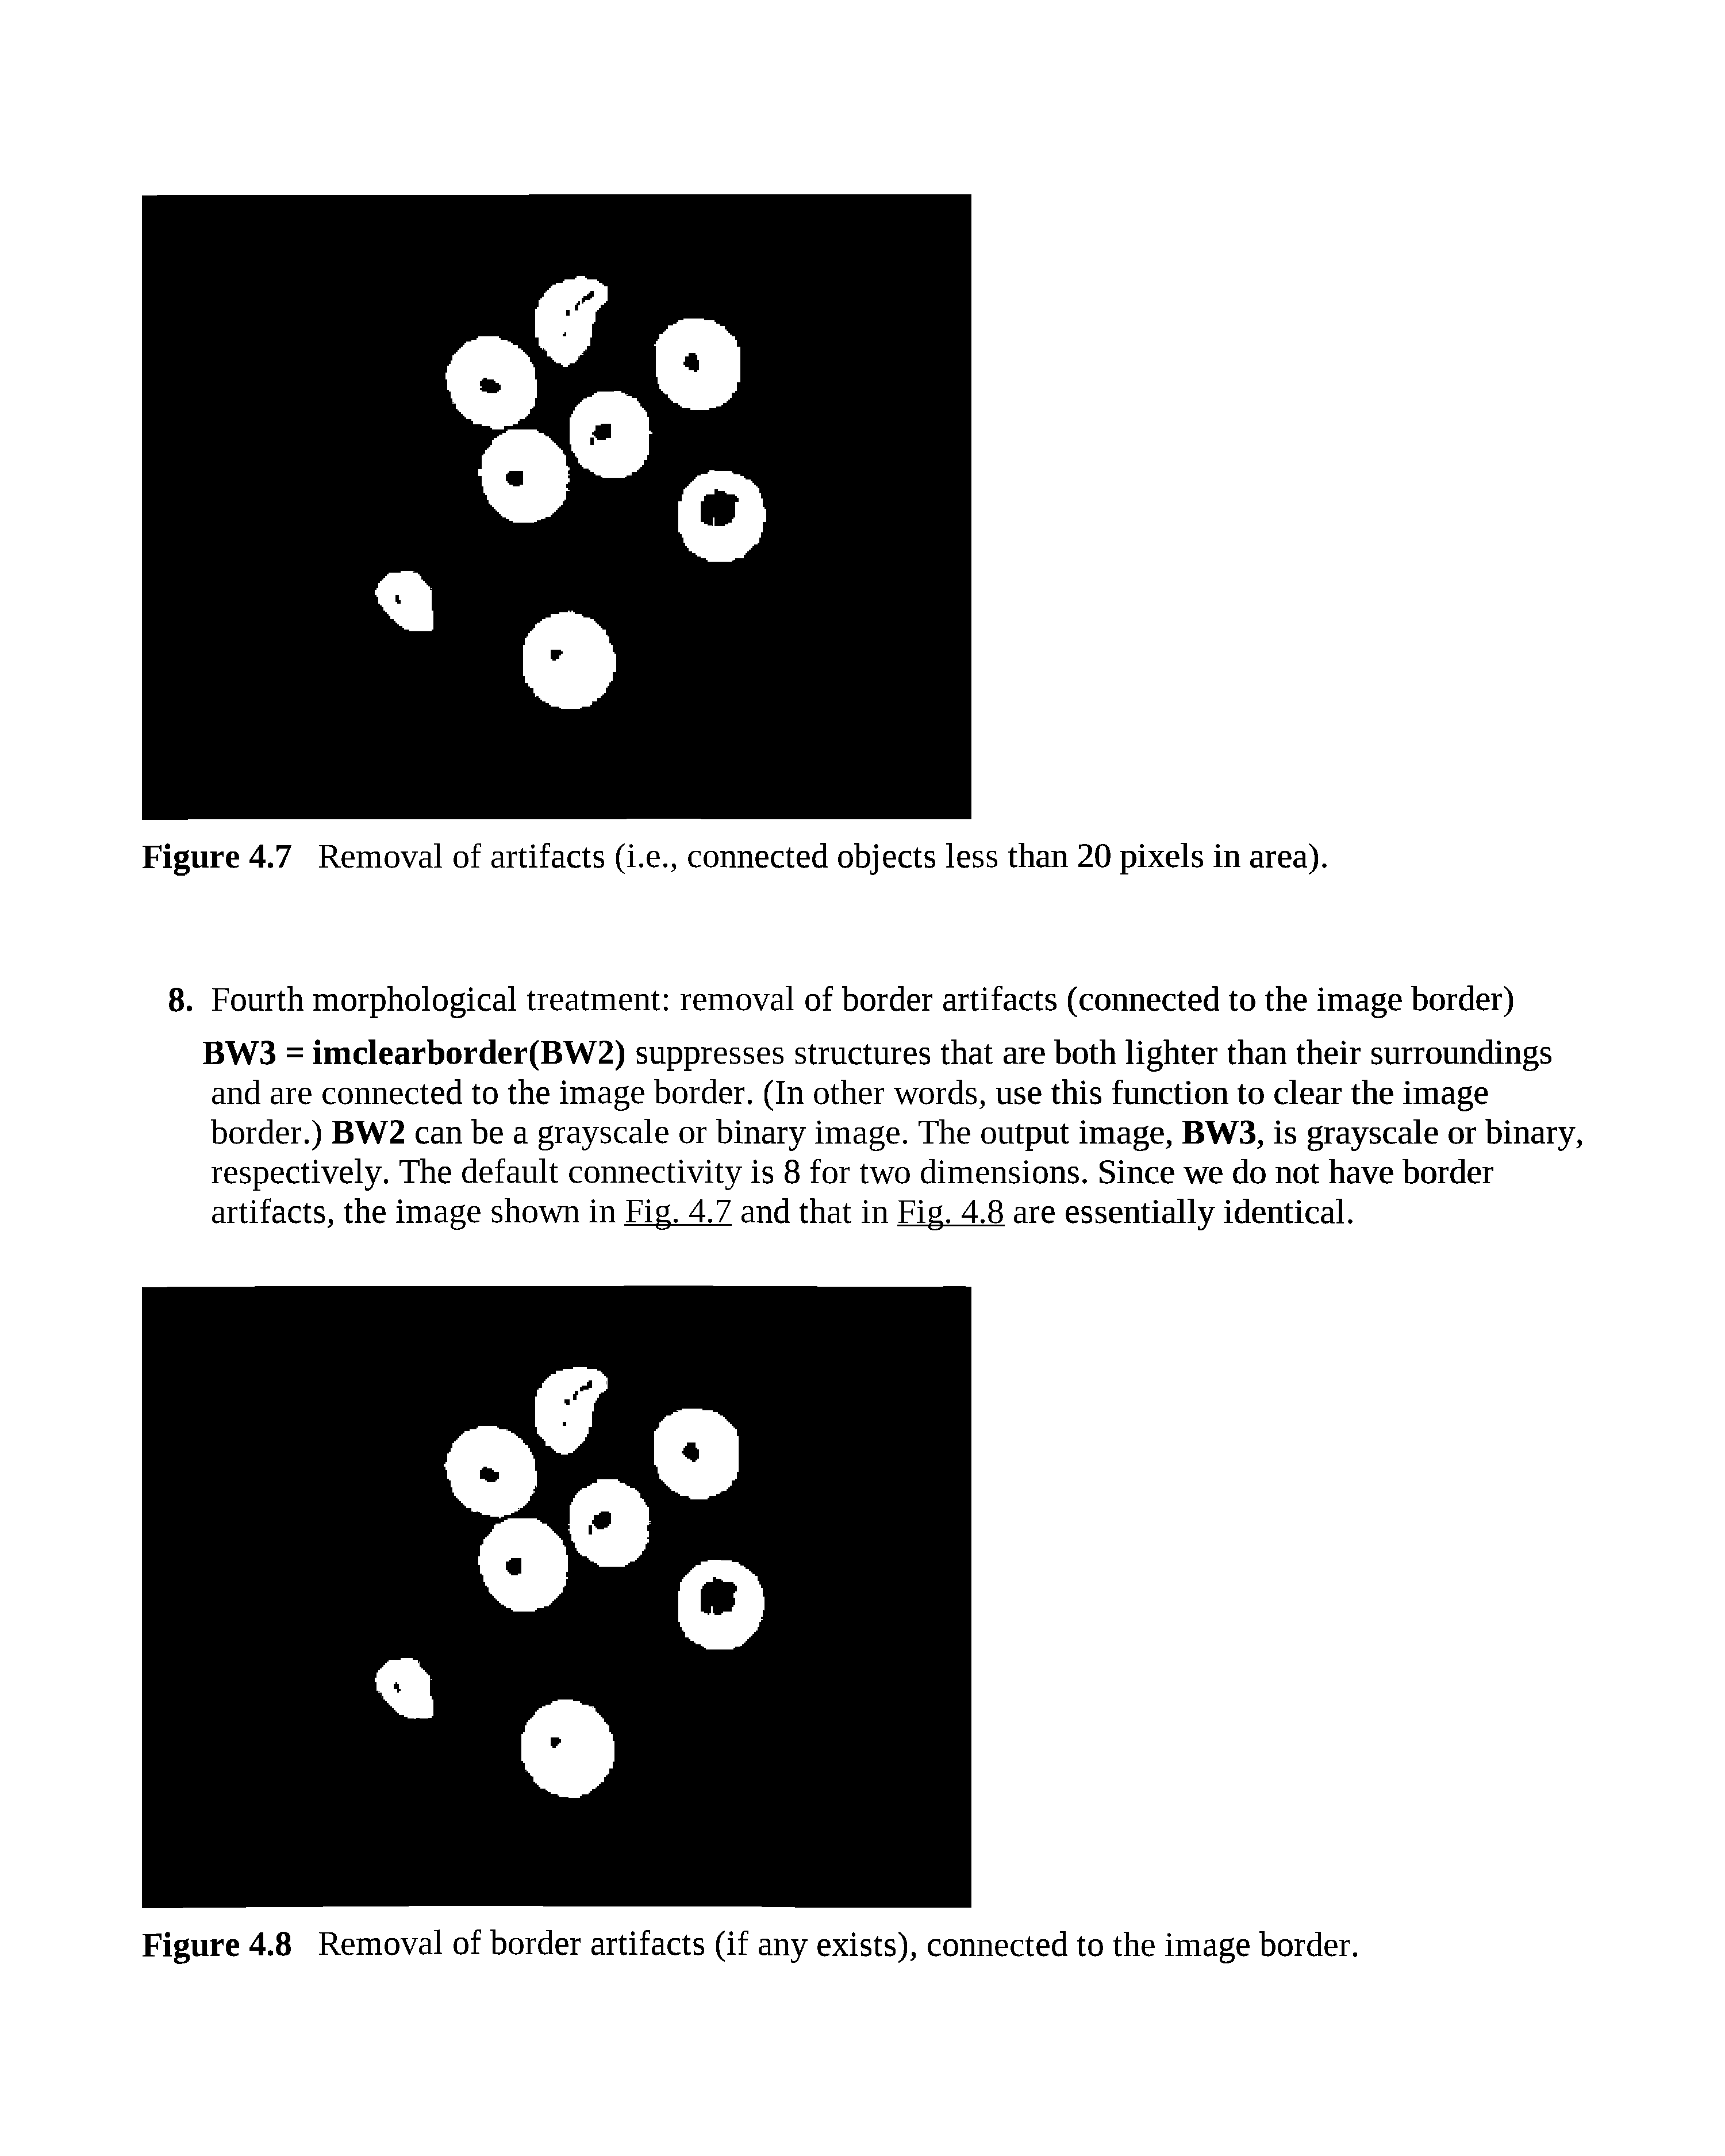 Figure 4.7 Removal of artifacts (i.e., connected objects less than 20 pixels in area).